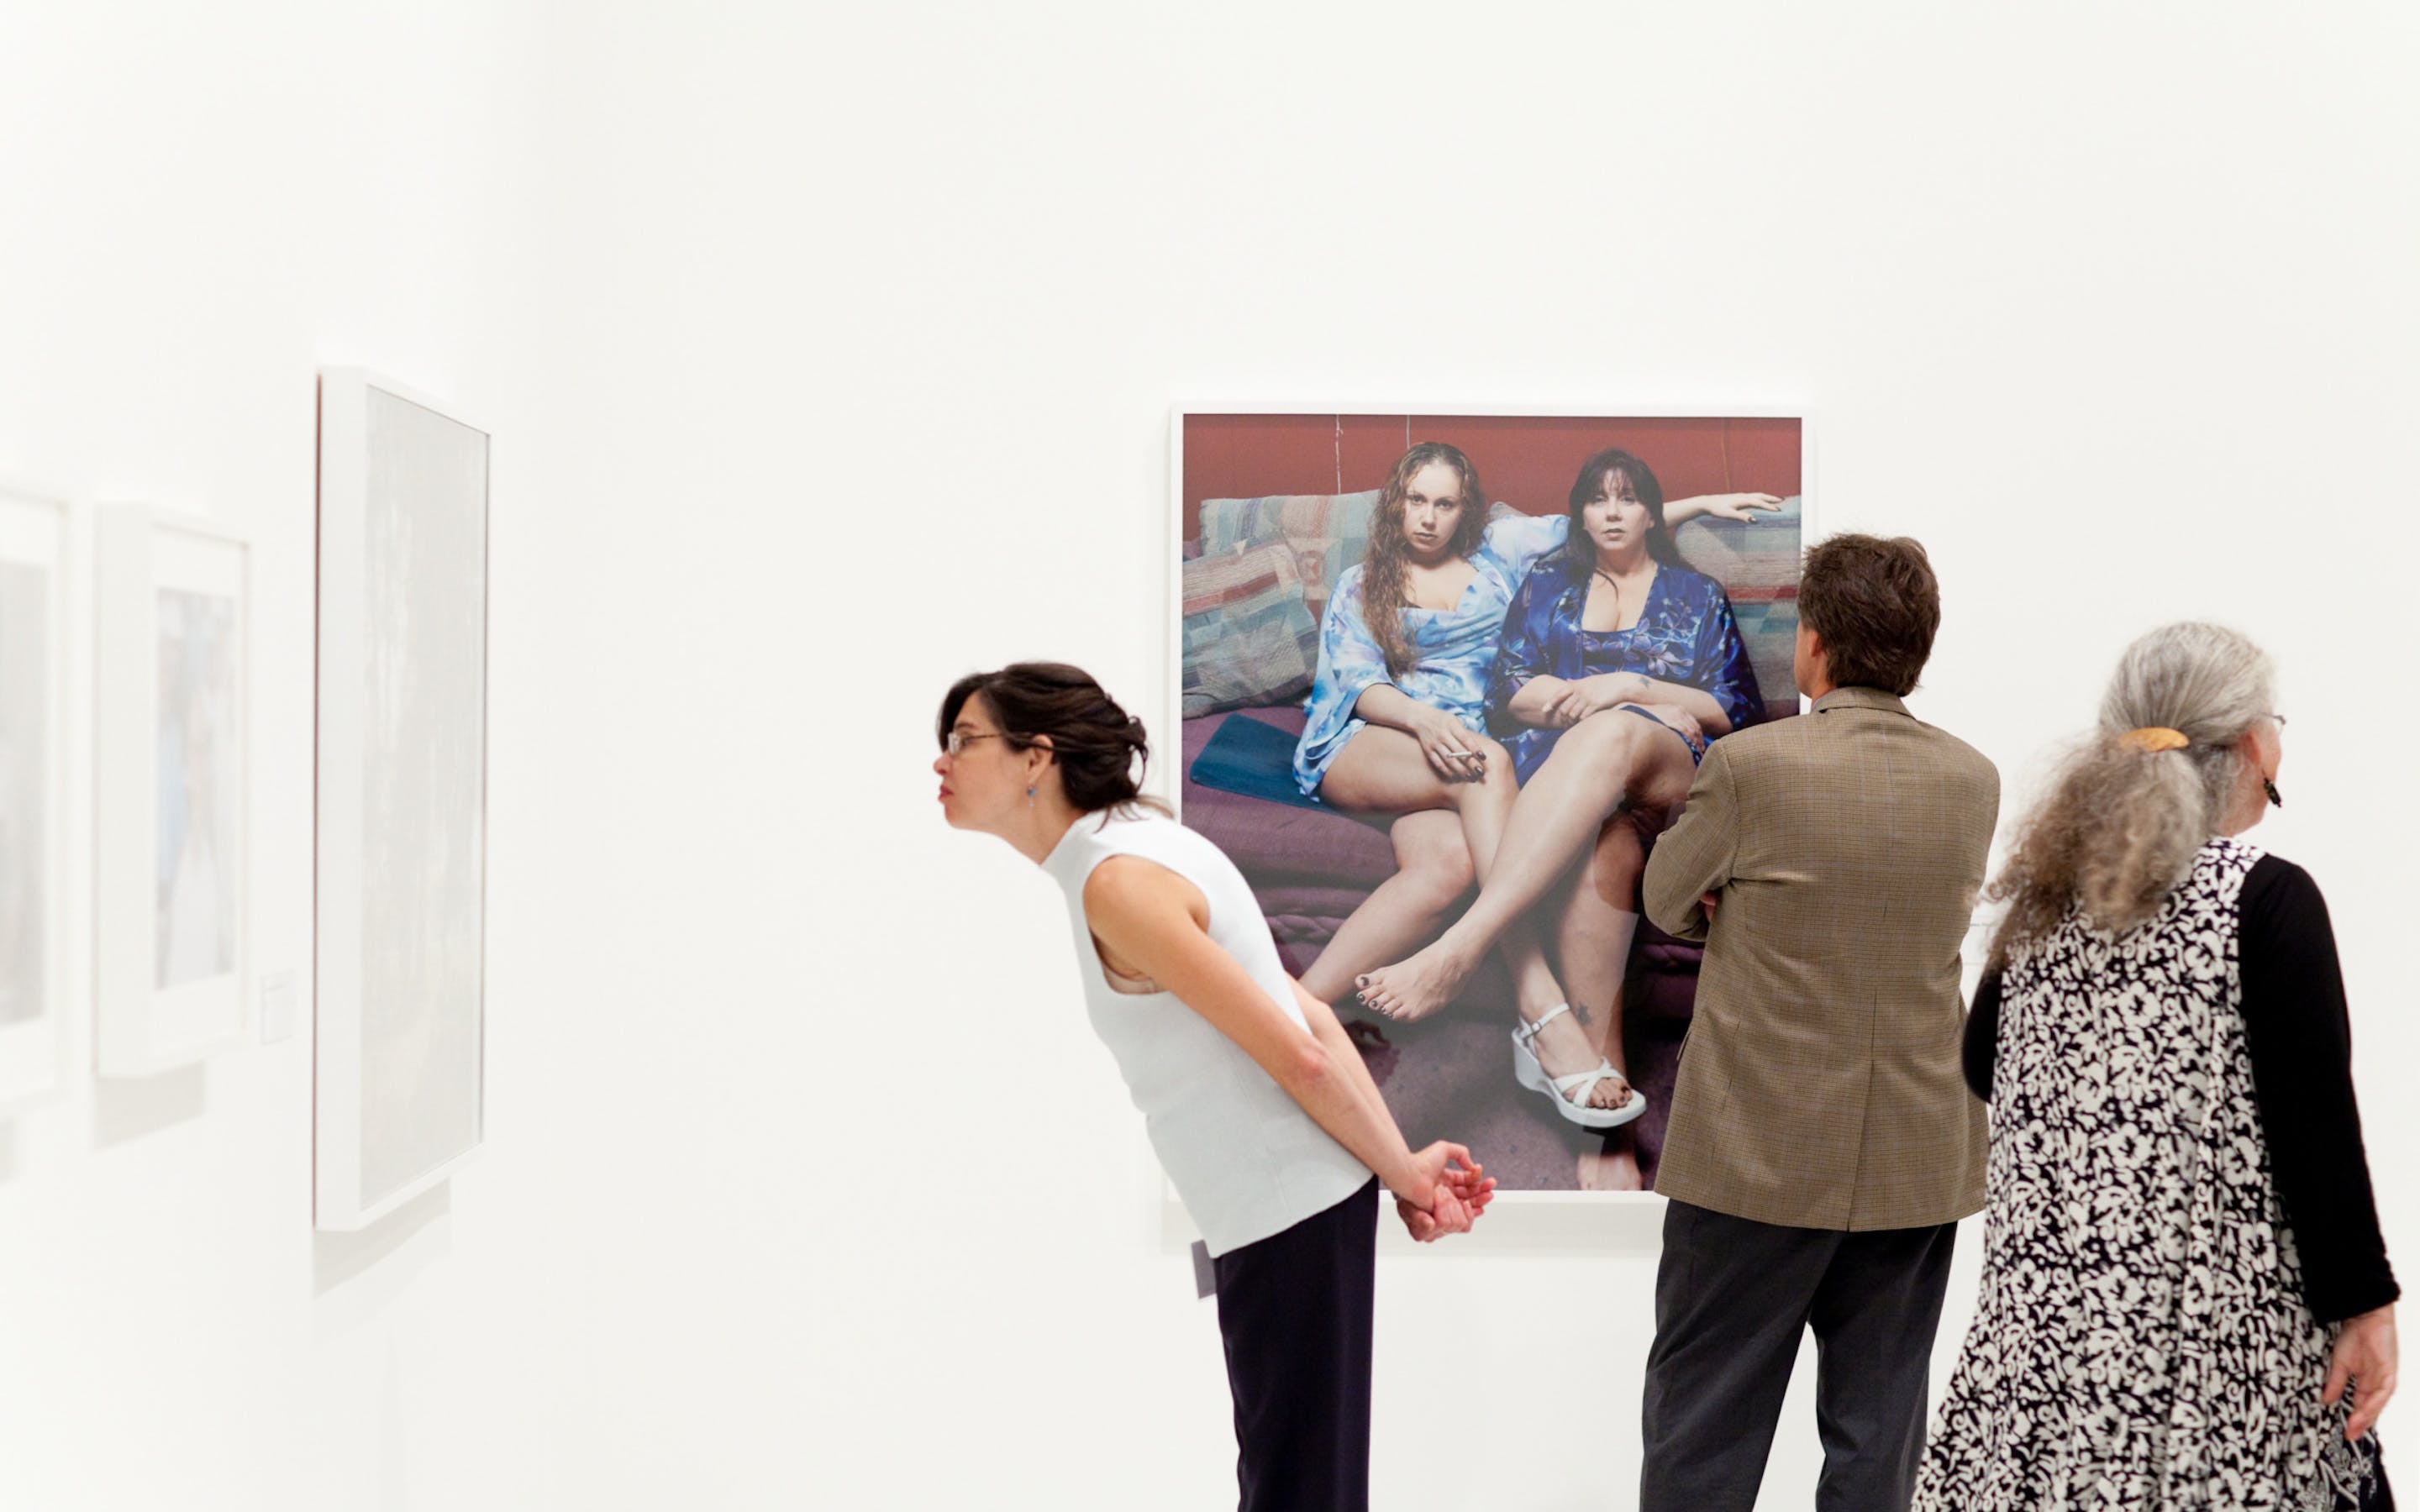 A woman leans forward to look closer at a painting hanging on a gallery wall while two other adults look at another painting on another wall.